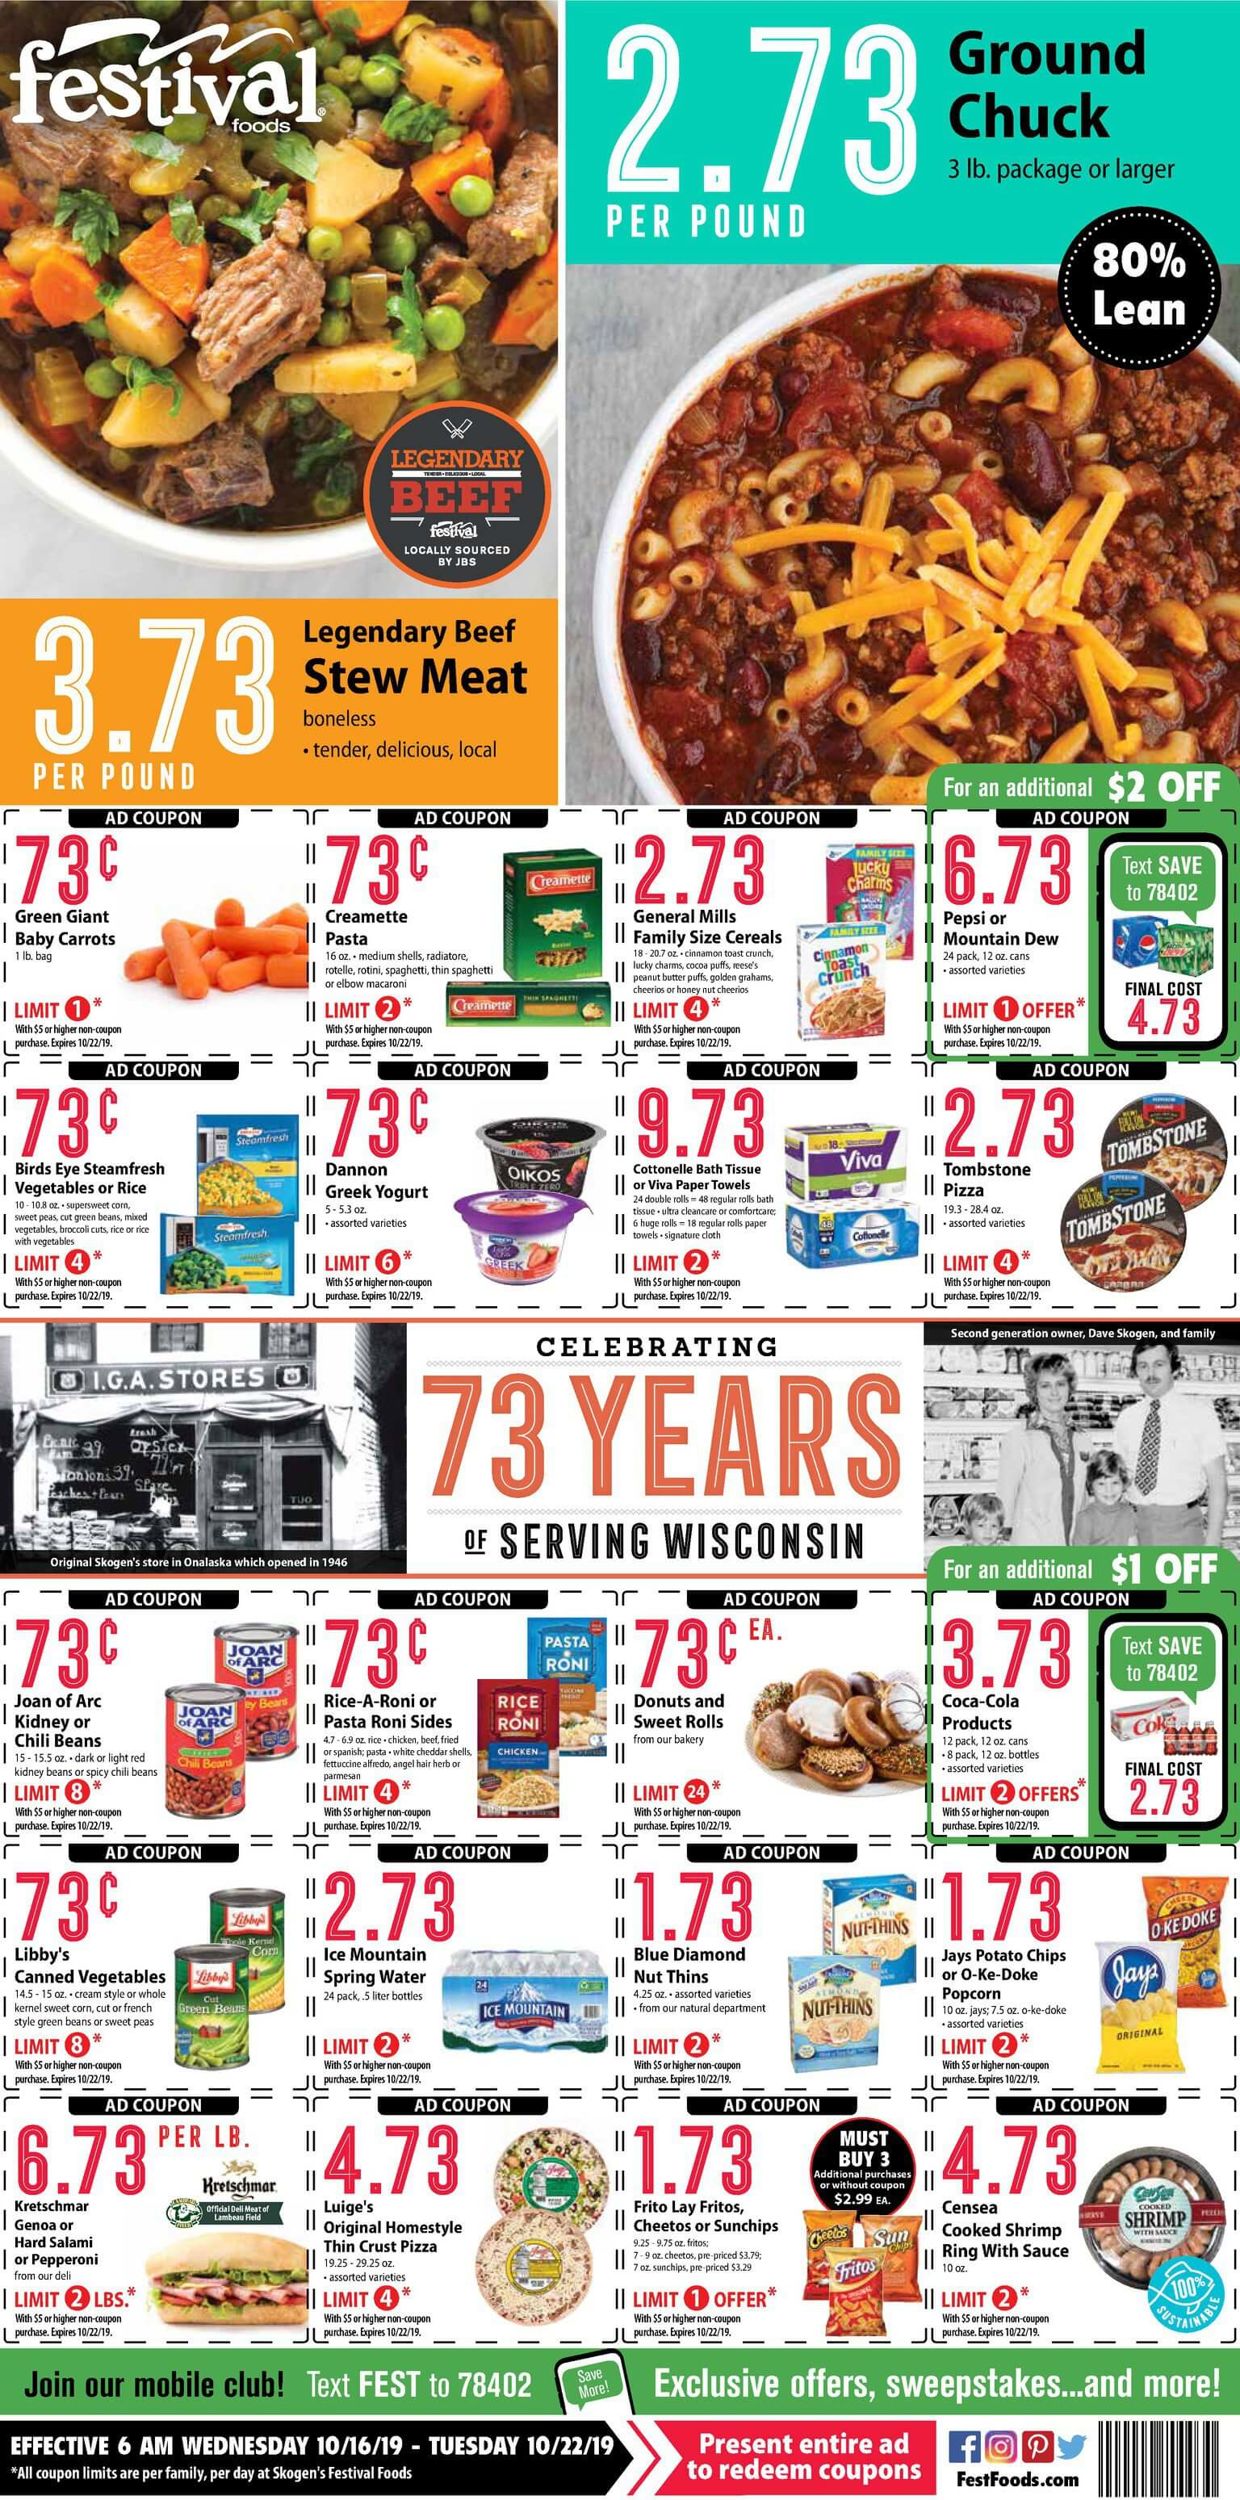 Festival Foods Current weekly ad 10/16 - 10/22/2019 - frequent-ads.com